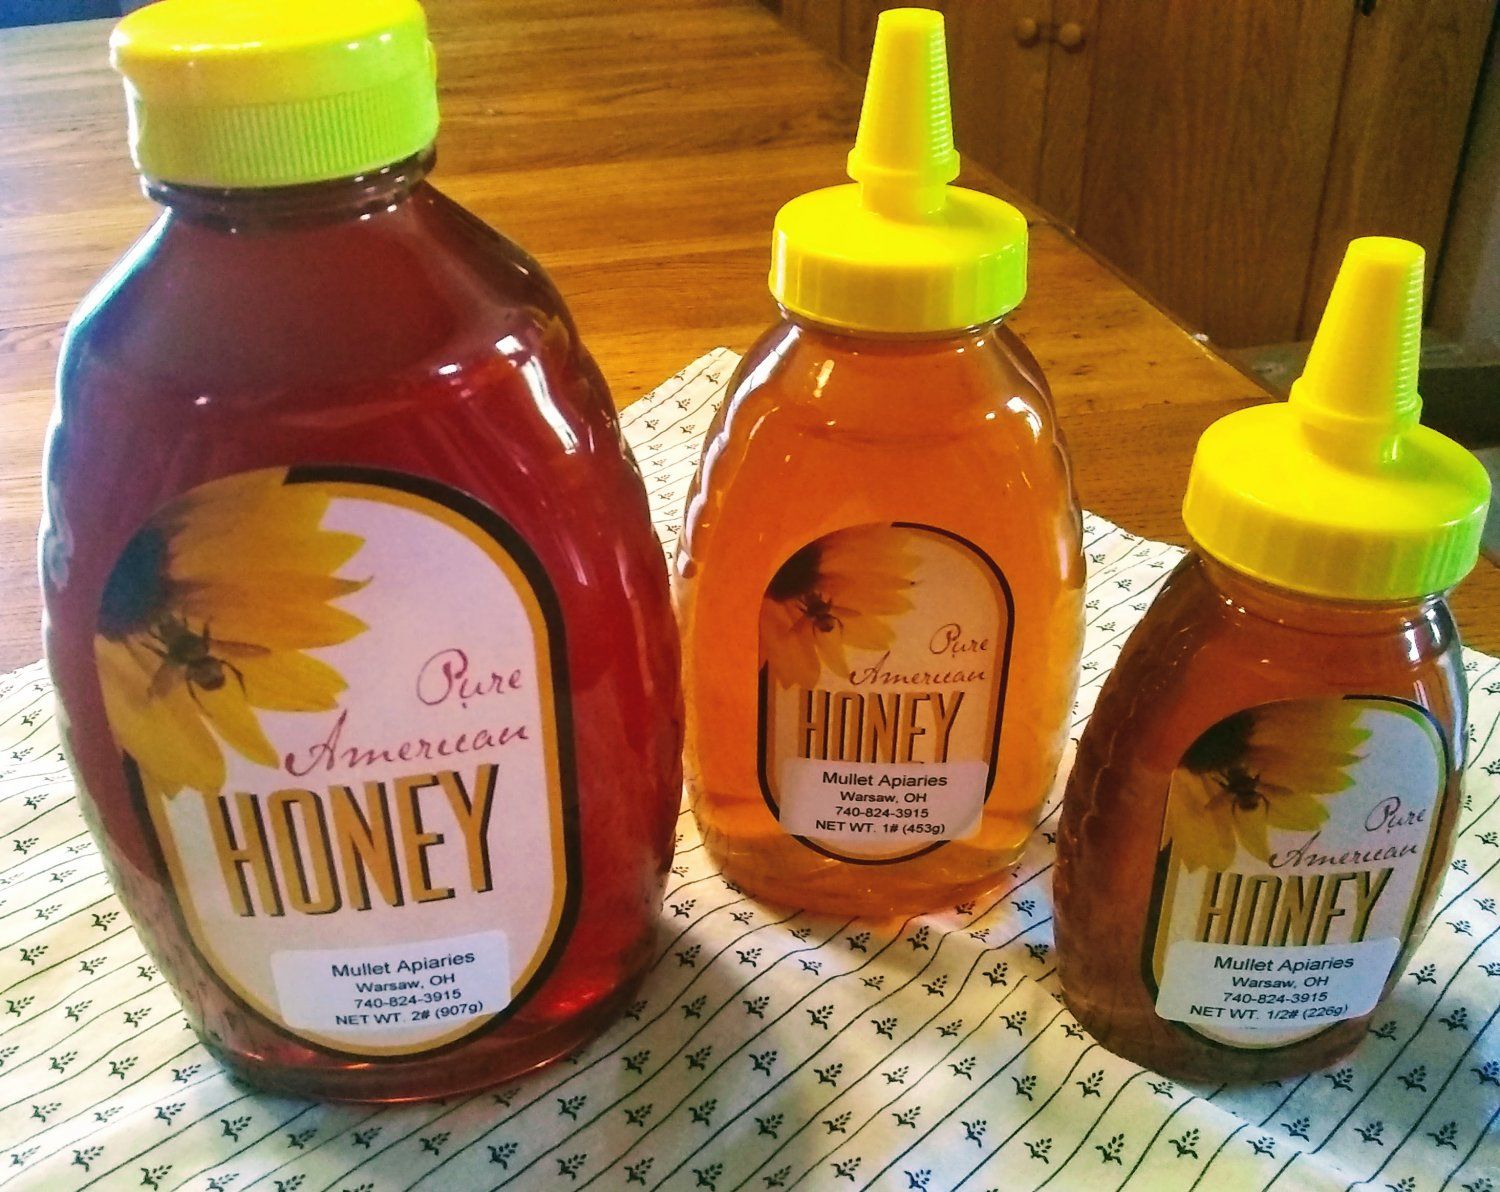 Previous Happening: New Product—Local Honey!